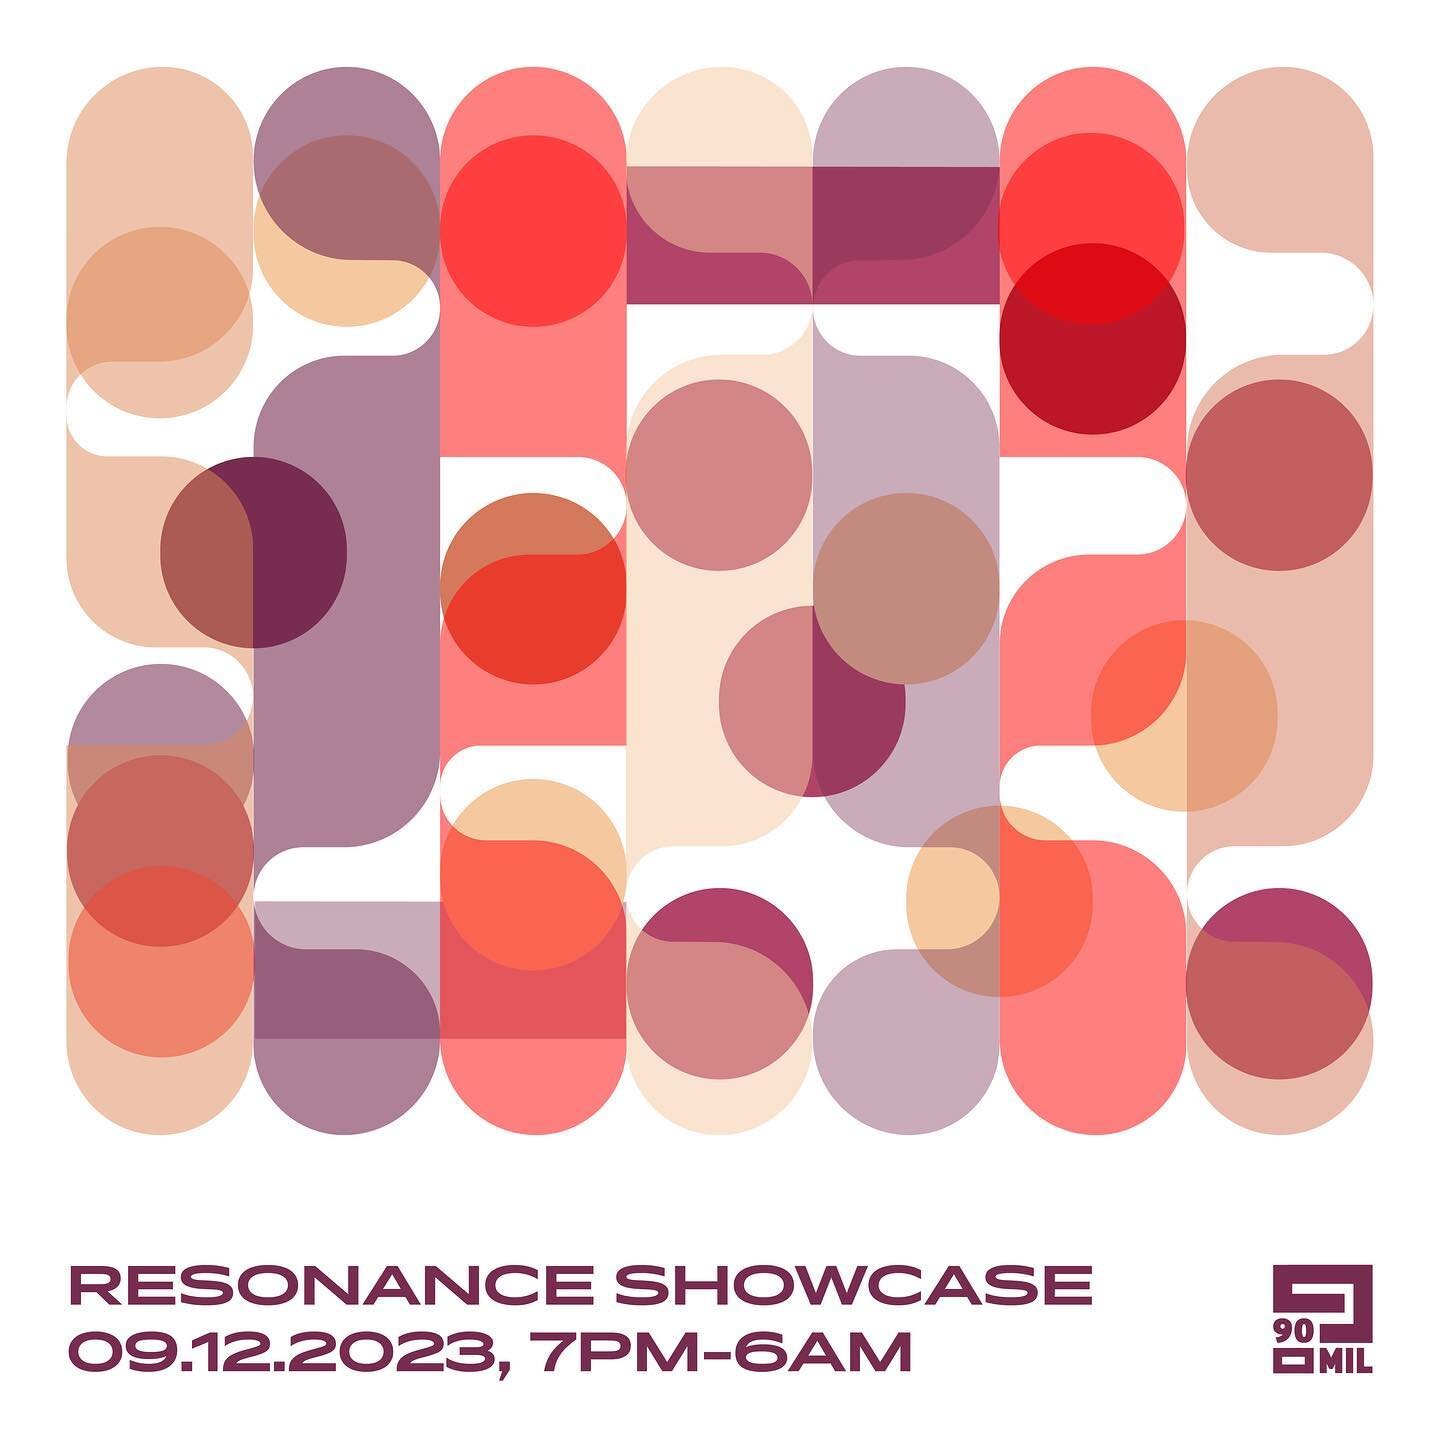 SAVE THE DATE &bull; 09.12.2023 &bull; RESONANCE SHOWCASE @90mil___ 

@resonance.music.community (fka @resonance.music.retreat) is cooking something! 
Save the date for our very first showcase on Saturday Dec 9th at @90mil___ in Berlin with many incr